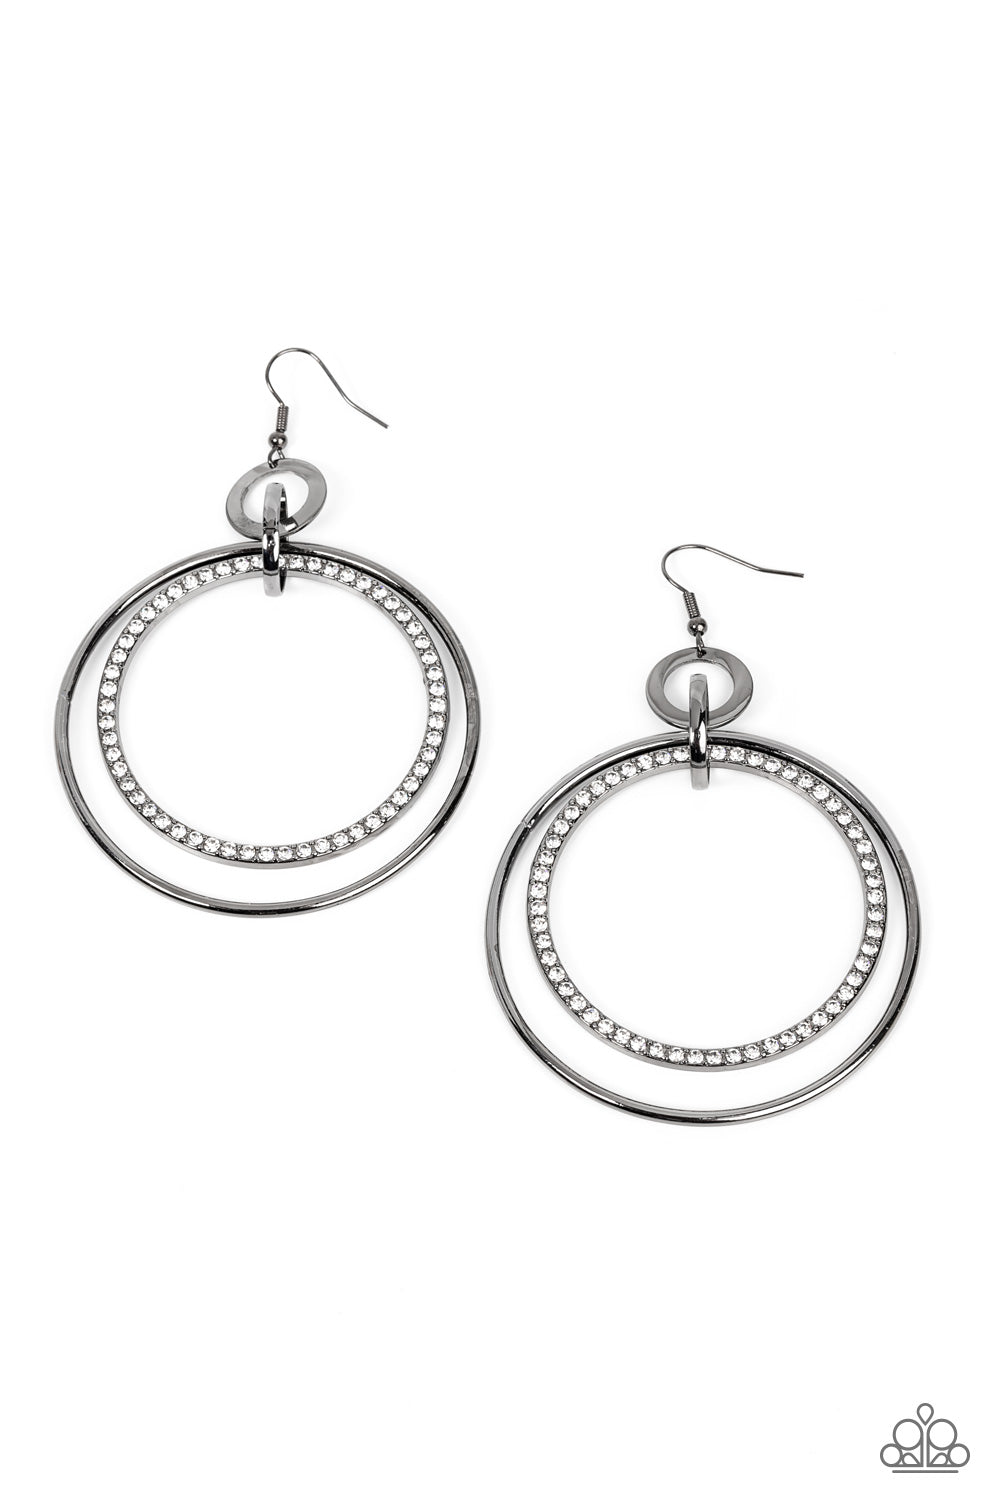 Haute Hysteria - Black Metal Fashion Earrings - Paparazzi Accessories - A white rhinestone encrusted gunmetal ring and glistening gunmetal hoop swings from the bottom of mismatched gunmetal rings, rippling into a dizzying and dazzling oversized hoop fashion earrings.